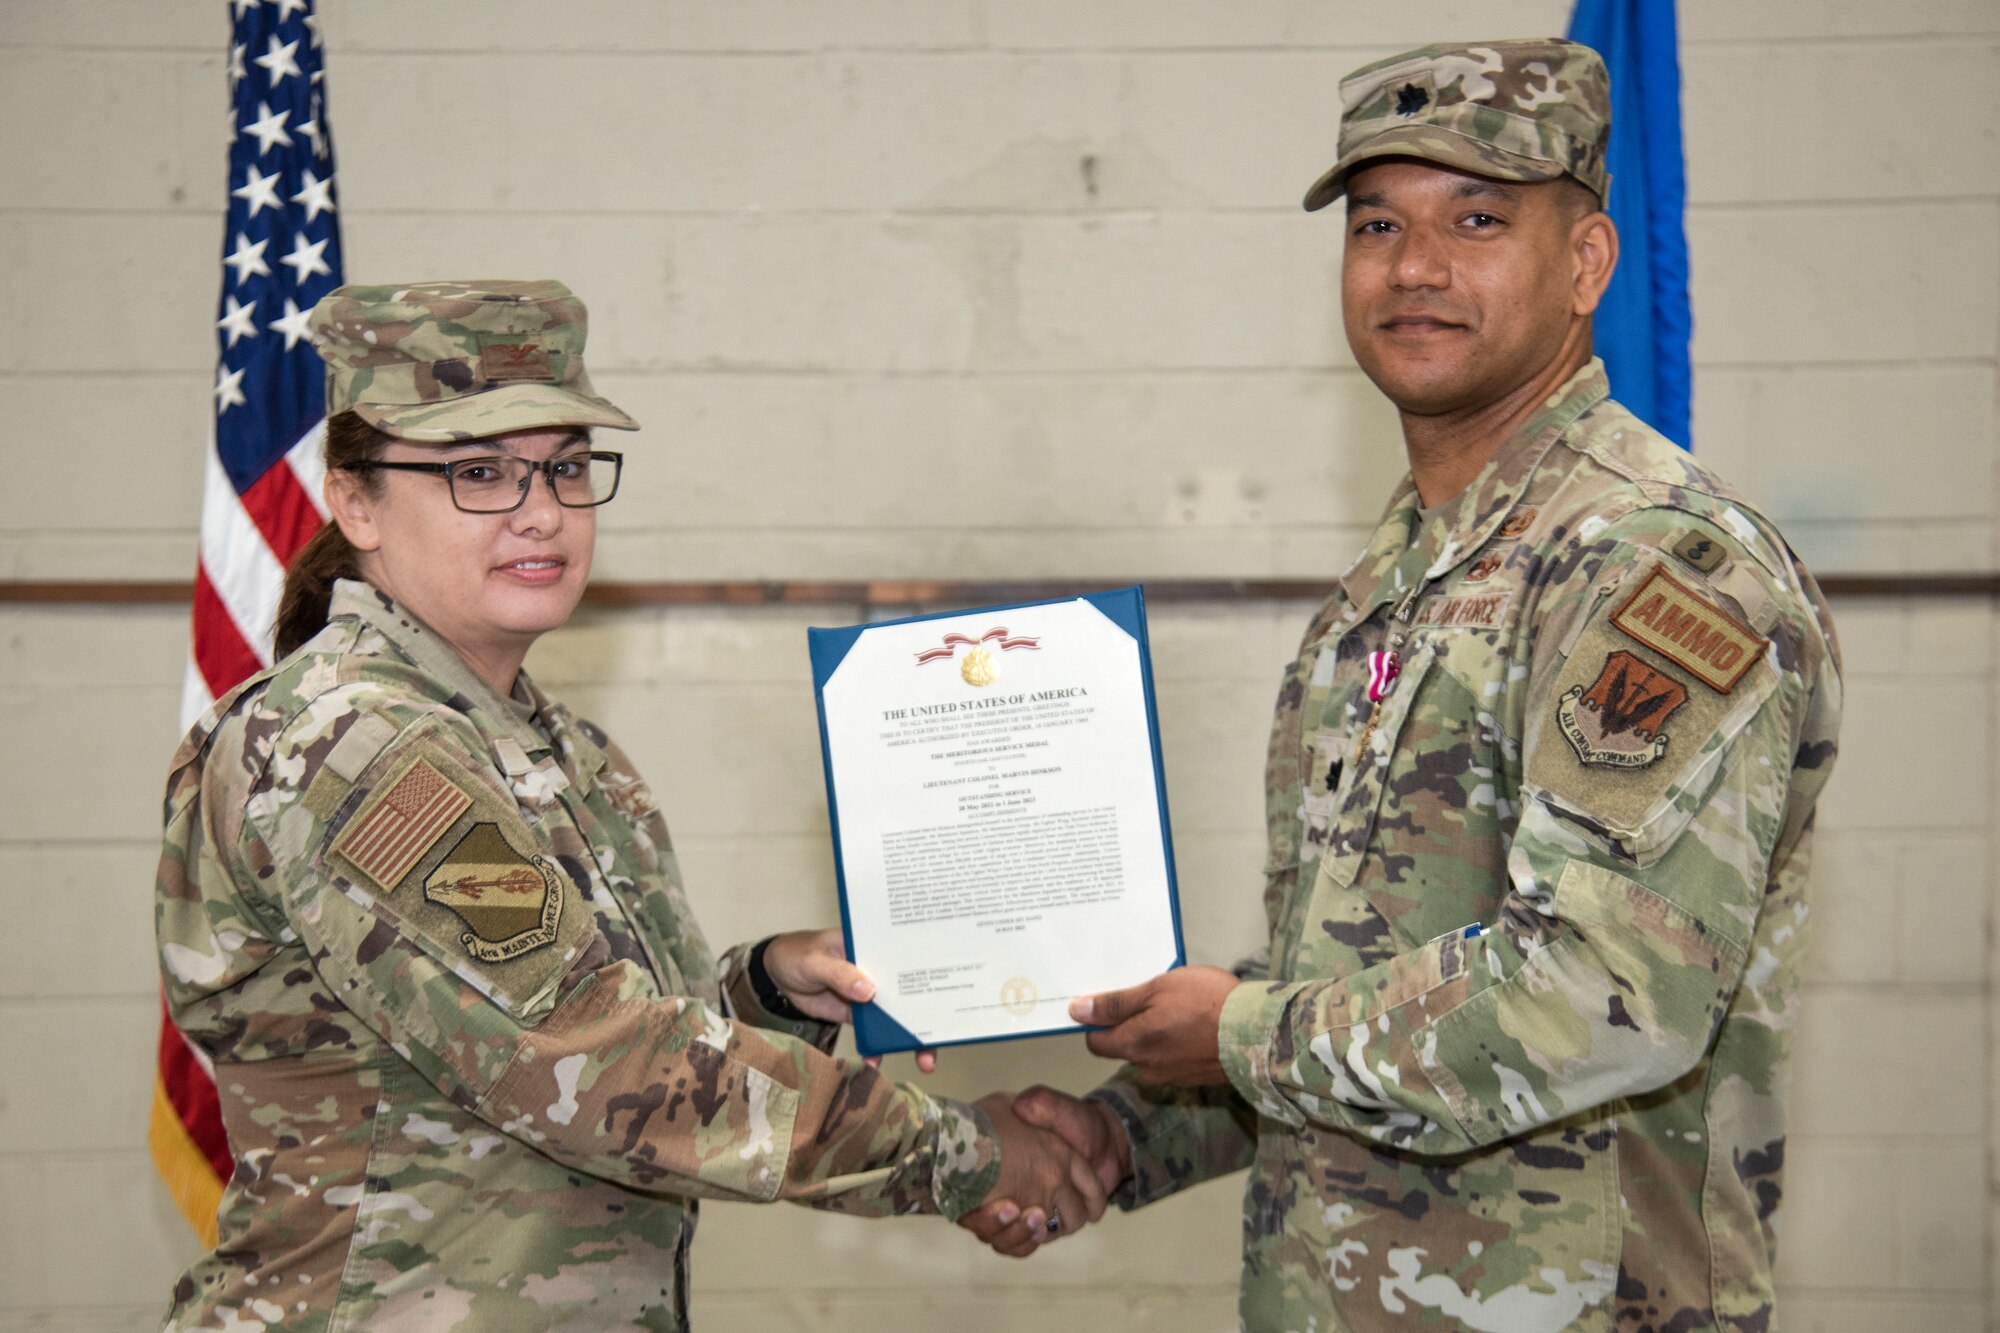 Col. Kathryn Roman, left, 4th Maintenance Group commander, awards the Meritorious Service Medal and certificate to Lt. Col. Marvin Hinkson, right, 4th Munitions Squadron outgoing commander, during the 4th MUNS change of command ceremony at Seymour Johnson Air Force Base, North Carolina, June 1, 2023. In keeping with tradition, the ceremony gave Hinkson chance to bid his Airmen farewell, and allowed Maj. James Phillips, 4th MUNS incoming commander, the opportunity to formally assume command of the squadron, meet the Airmen in his unit, and express his aspirations for the squadron’s future. (U.S. Air Force photo by Tech. Sgt. Christopher Hubenthal)